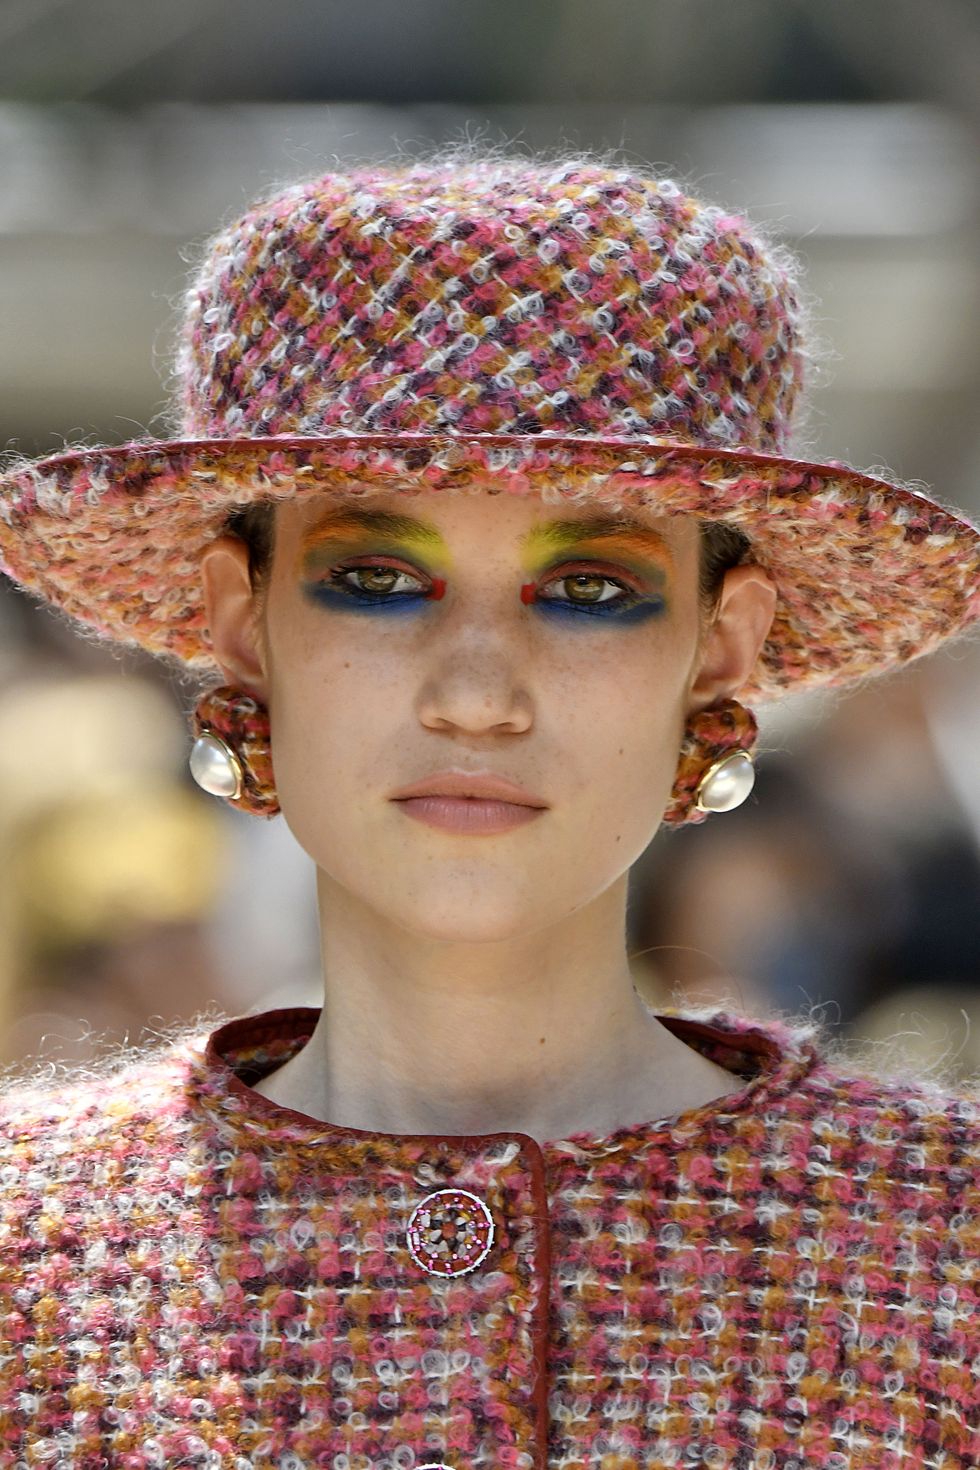 PARIS, FRANCE - JULY 04: A model walks the runway during the Chanel Haute Couture Fall/Winter 2017-2018 show as part of Haute Couture Paris Fashion Week on July 4, 2017 in Paris, France. (Photo by Victor VIRGILE/Gamma-Rapho via Getty Images)